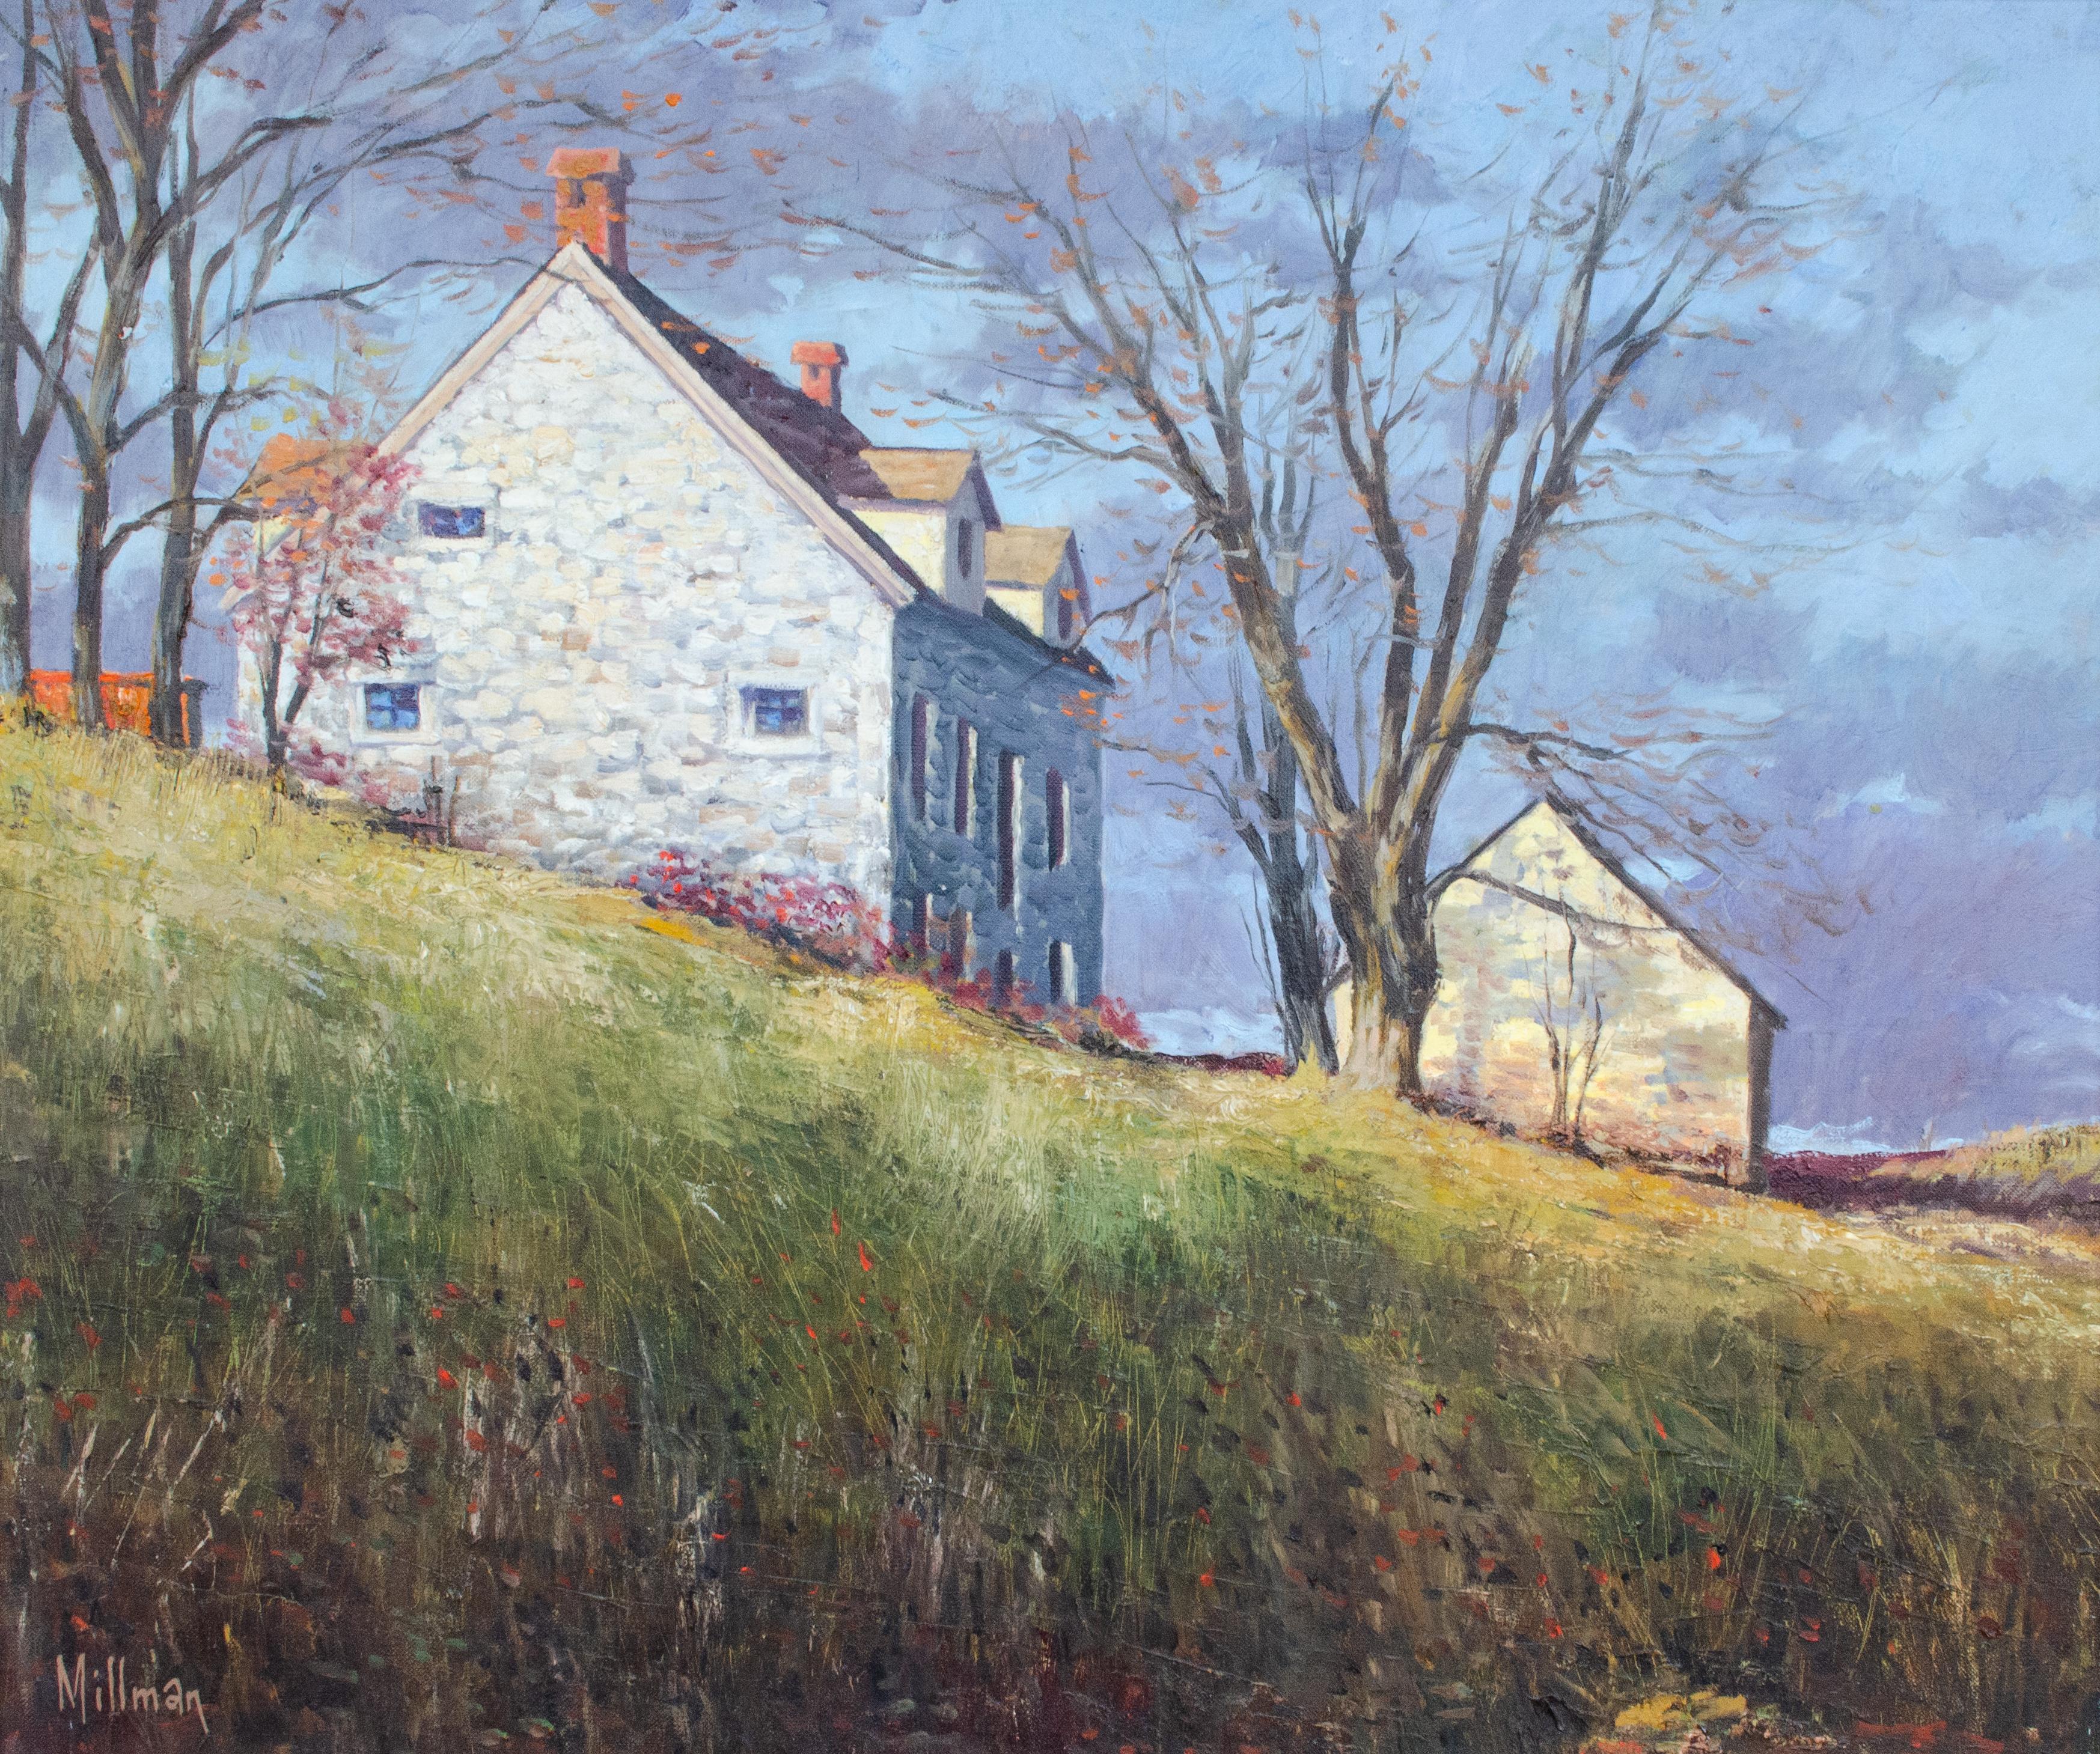  1970s Farmhouse Painting Along NY 201, Autumn Scene by Max Millman For Sale 1